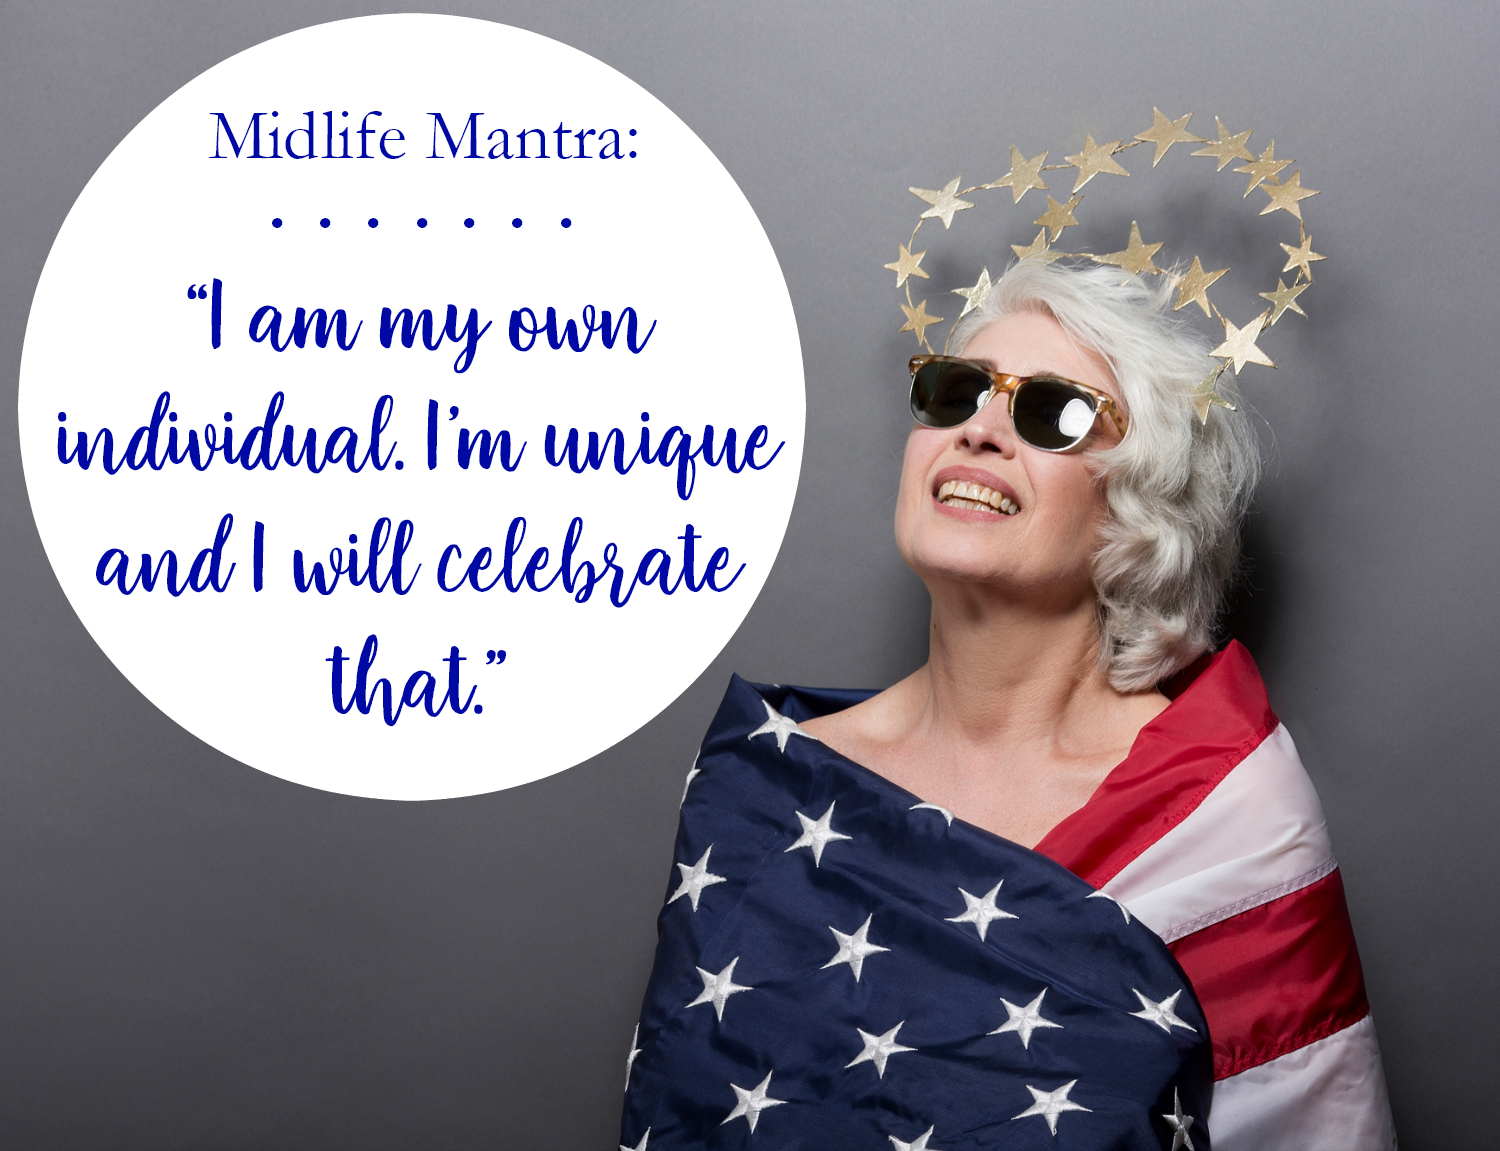 Midlife Mantra: I Am my Own Individual